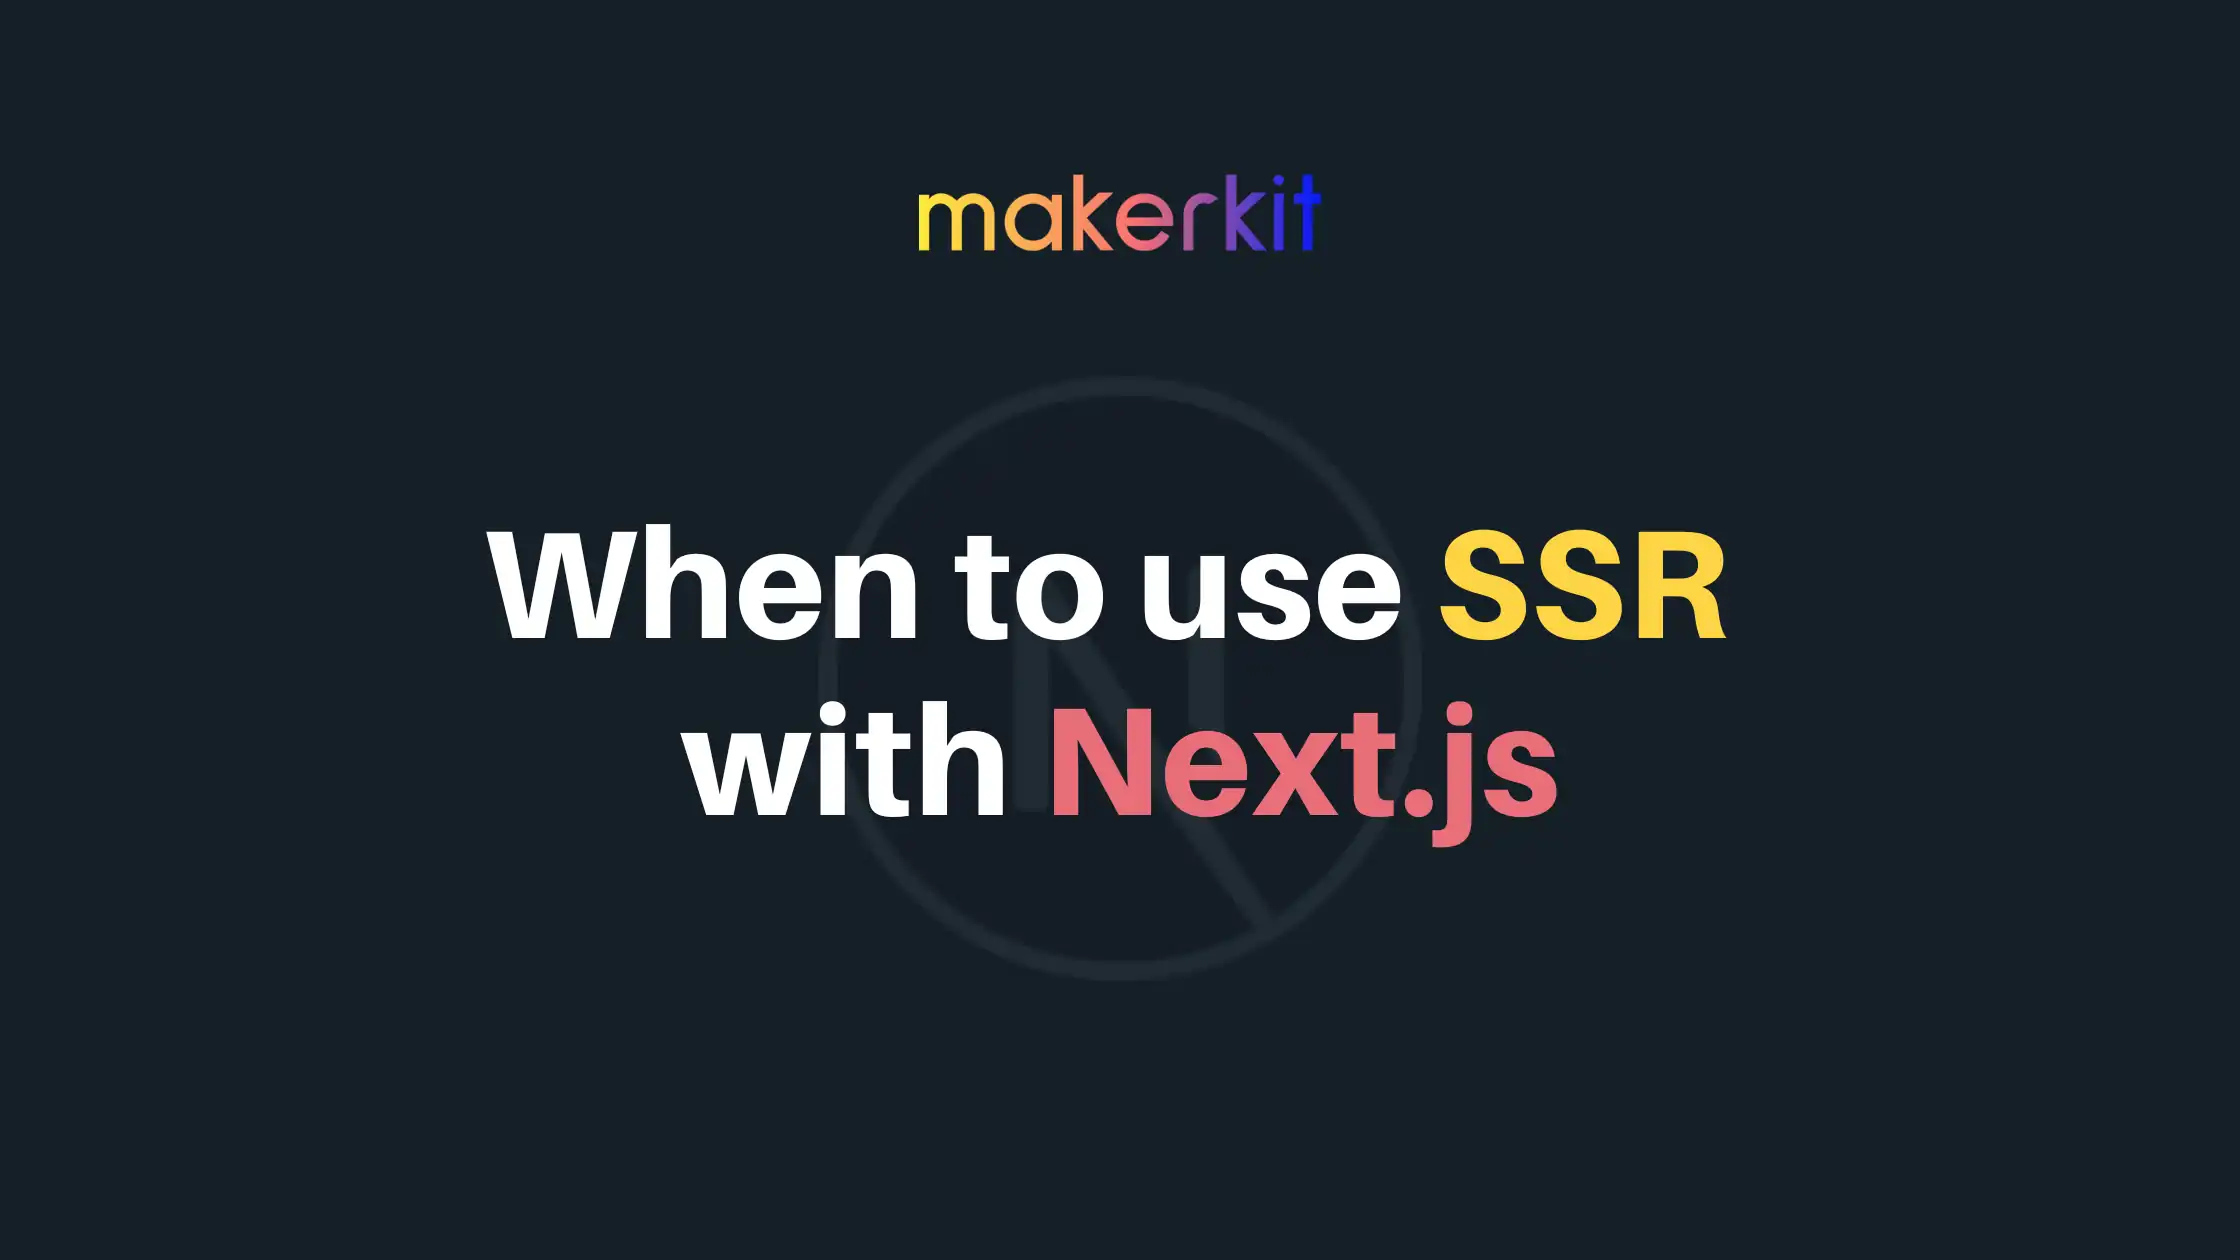 Cover Image for When to use SSR with Next.js